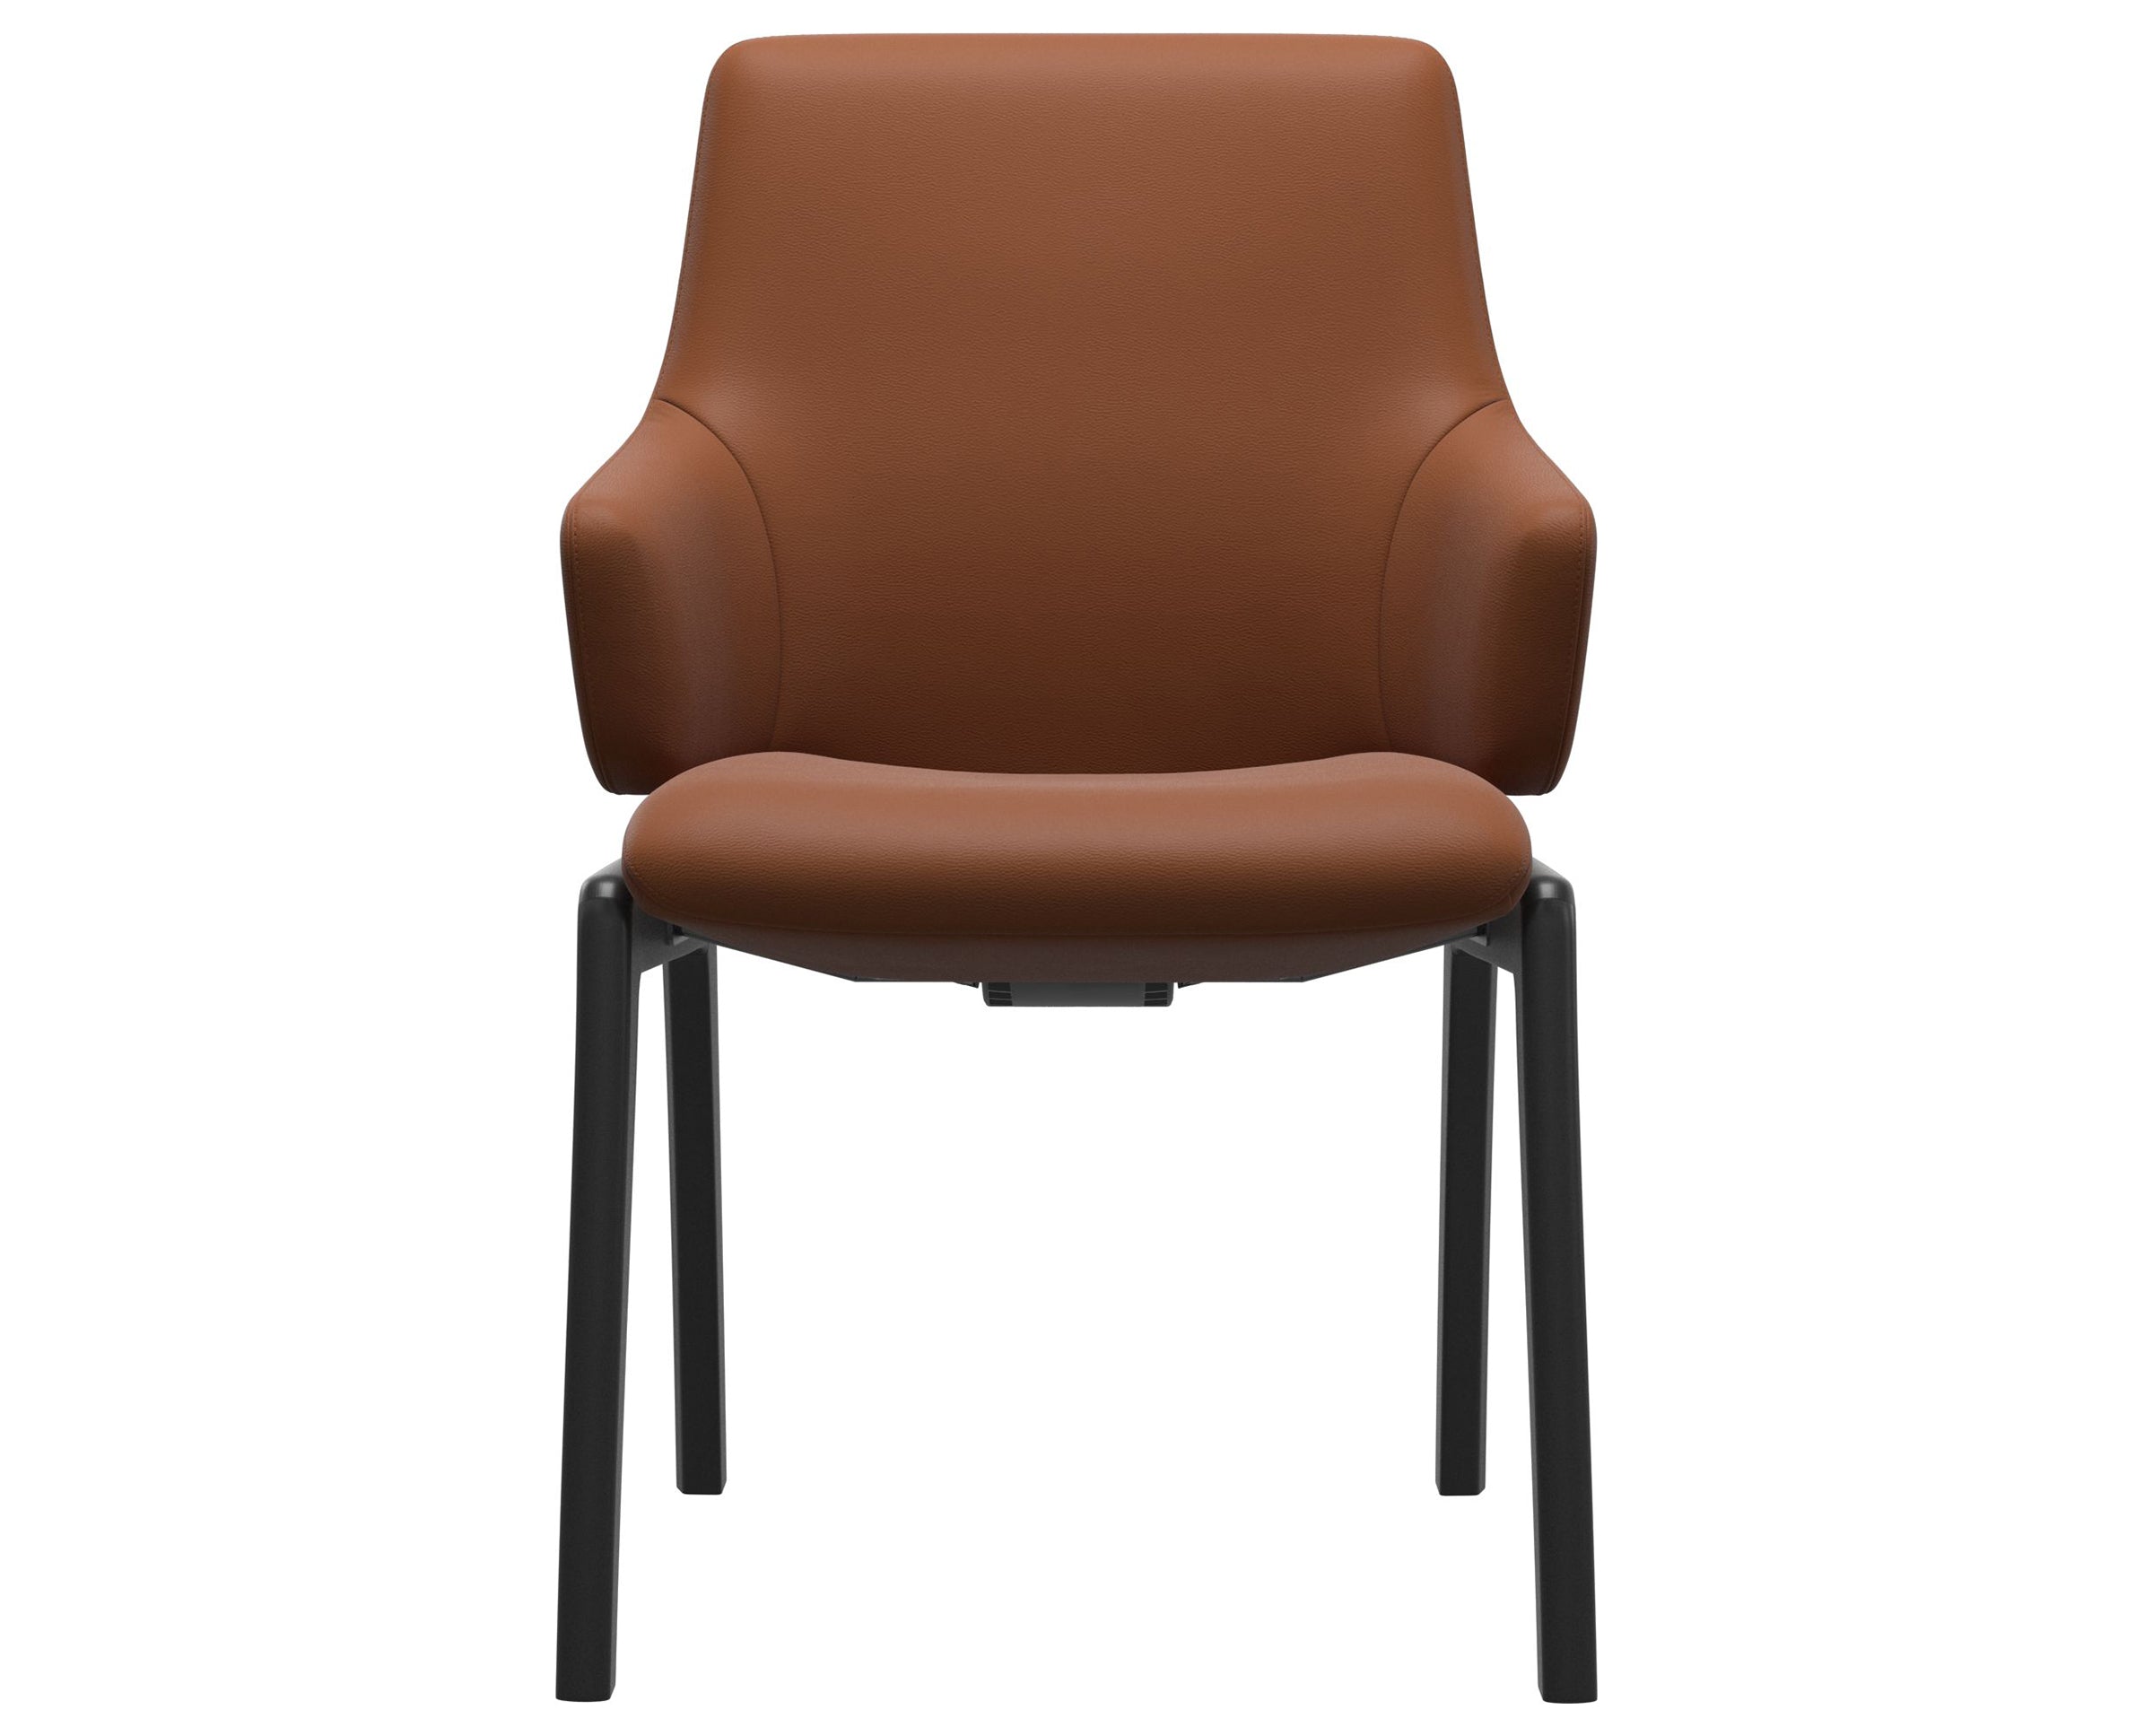 Paloma Leather New Cognac and Black Base | Stressless Laurel Low Back D100 Dining Chair w/Arms | Valley Ridge Furniture